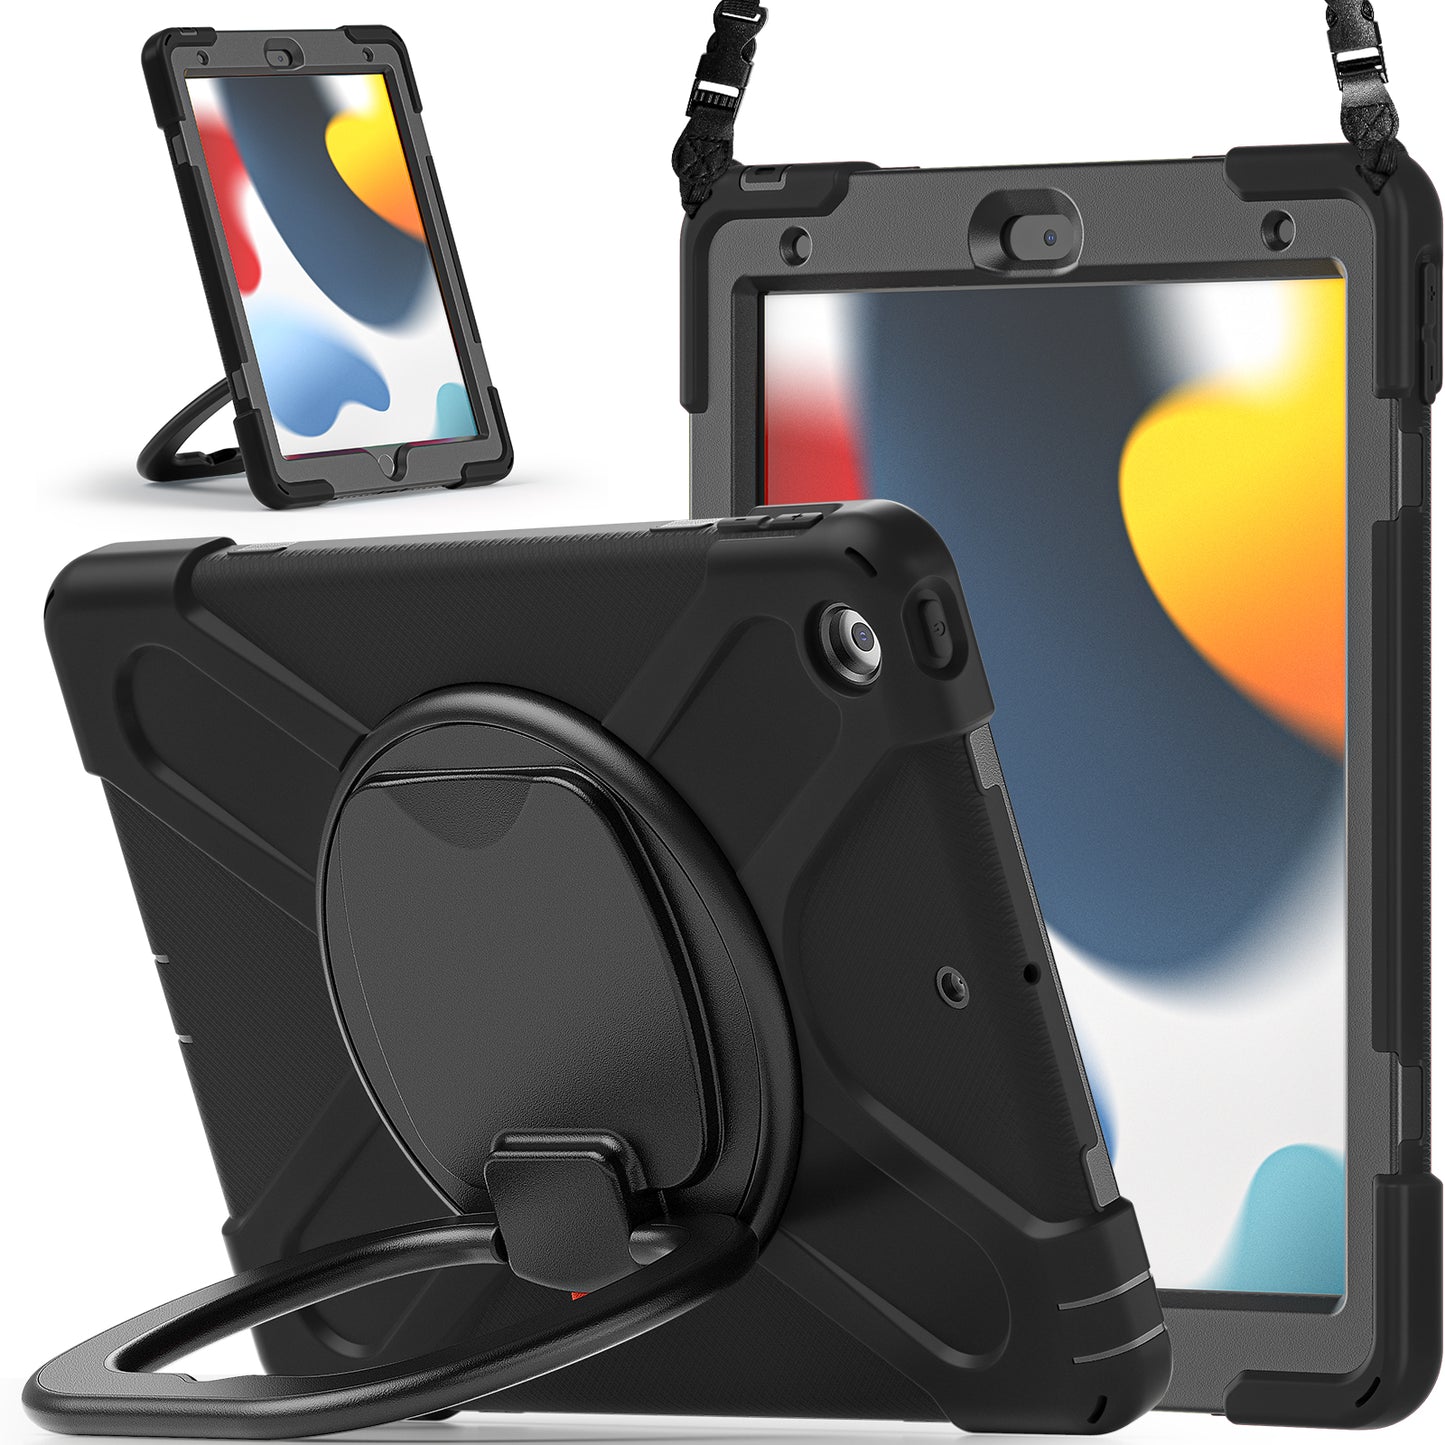 Pirate Box iPad 9 Case Hook Stand Rotating with Hand Holder Shoulder Strap